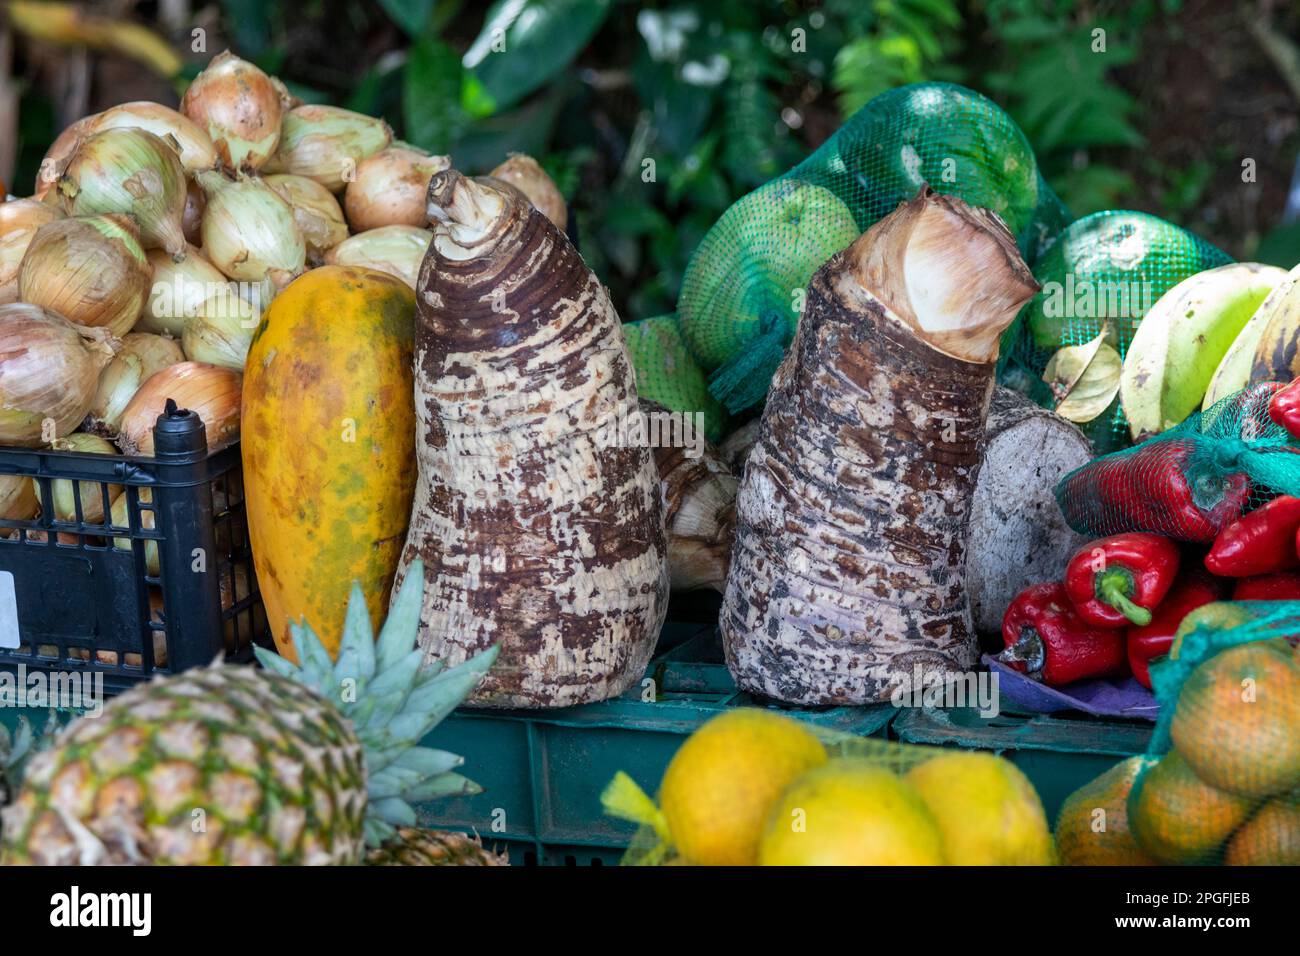 La Pavona, Costa Rica - Elephant ear root (Xanthosoma sagittifolium) among the locally-grown fruits and vegetables on sale at a produce stand. Stock Photo